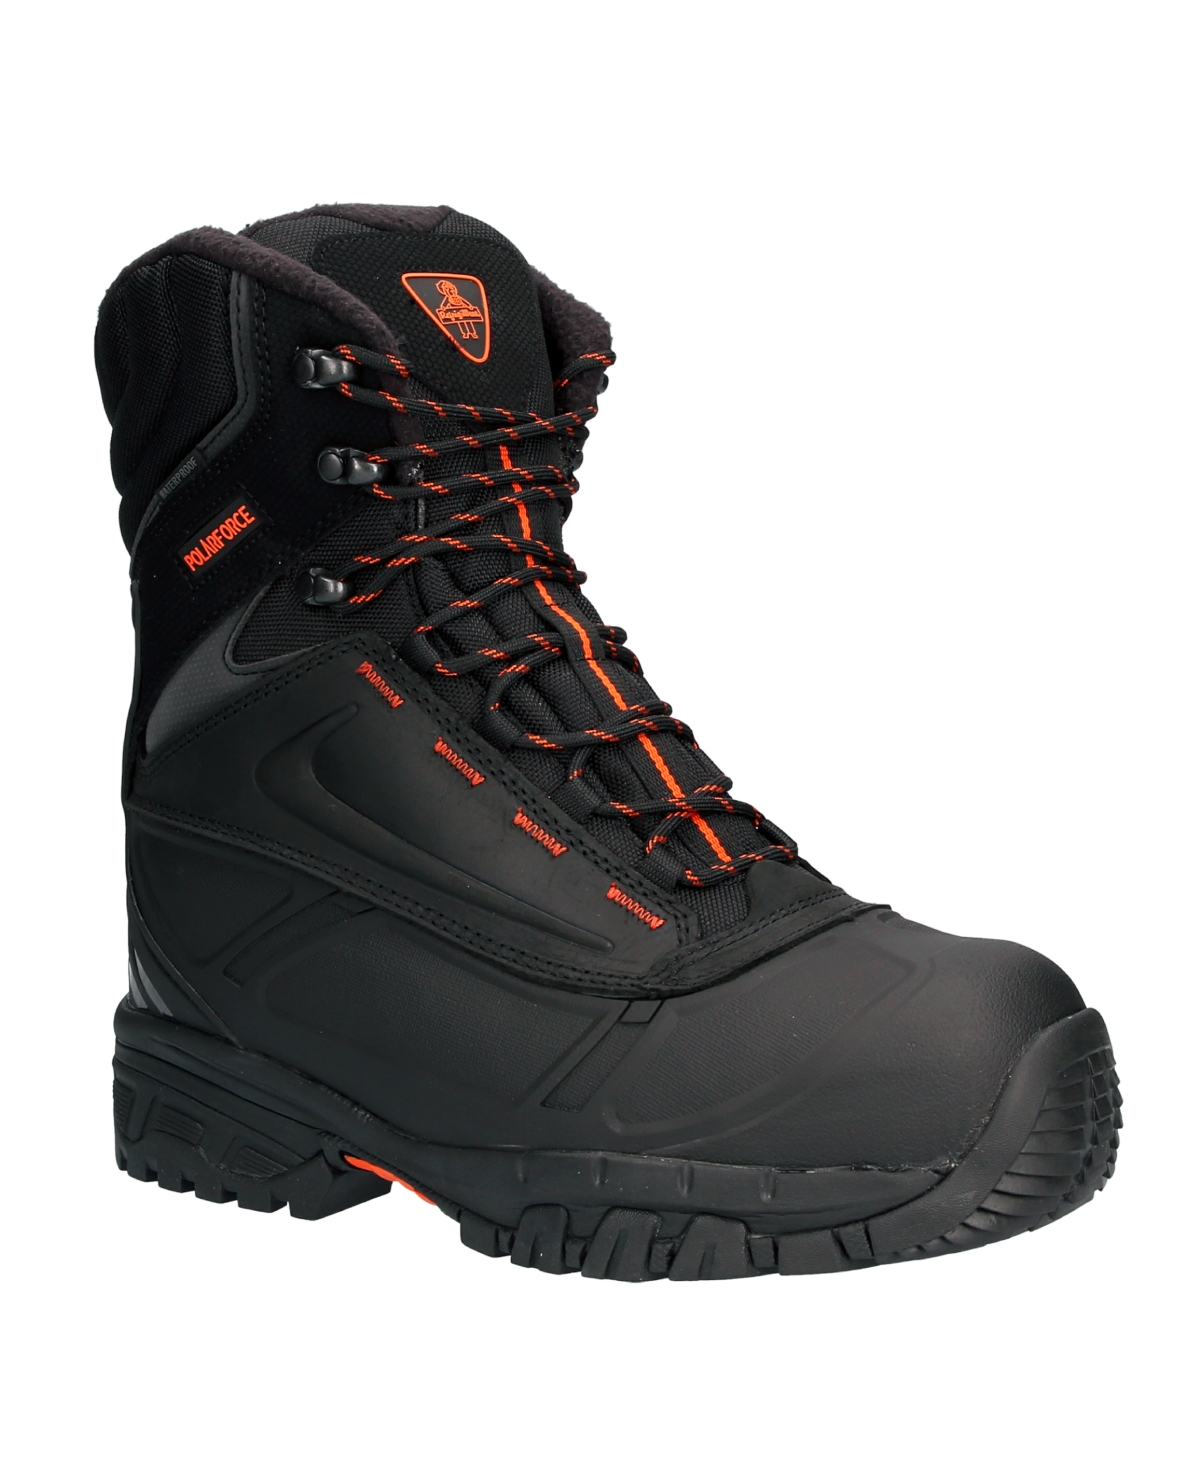 Men's Polar Force Max Waterproof Insulated 8-Inch Leather Work Boots - Black